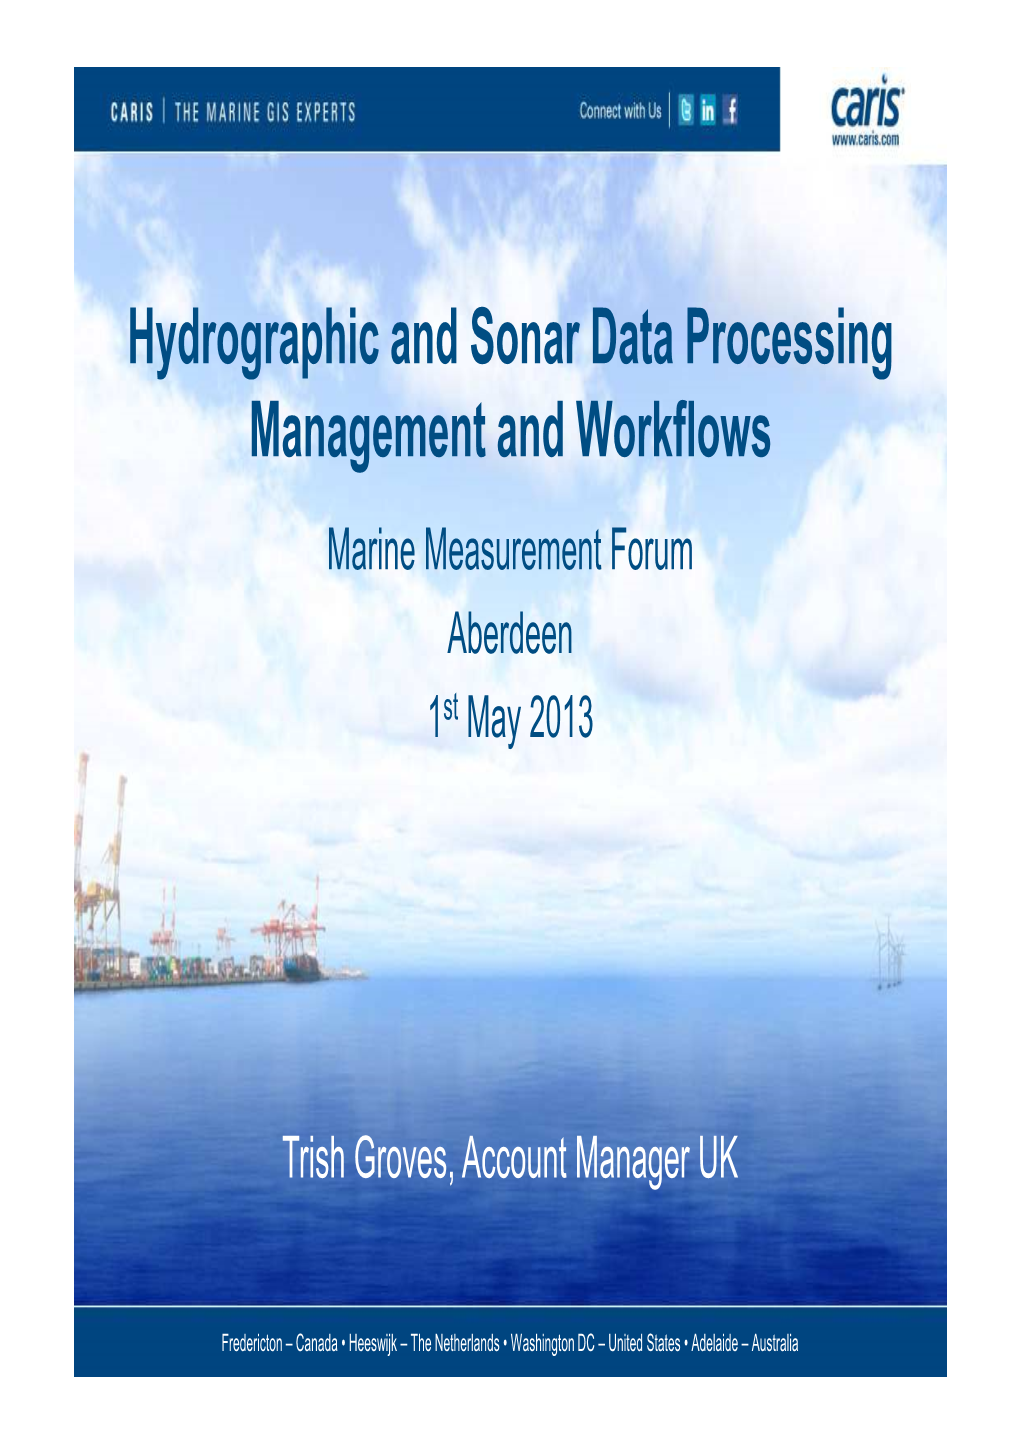 Hydrographic and Sonar Data Processing Management and Workflows Marine Measurement Forum Aberdeen 1St May 2013